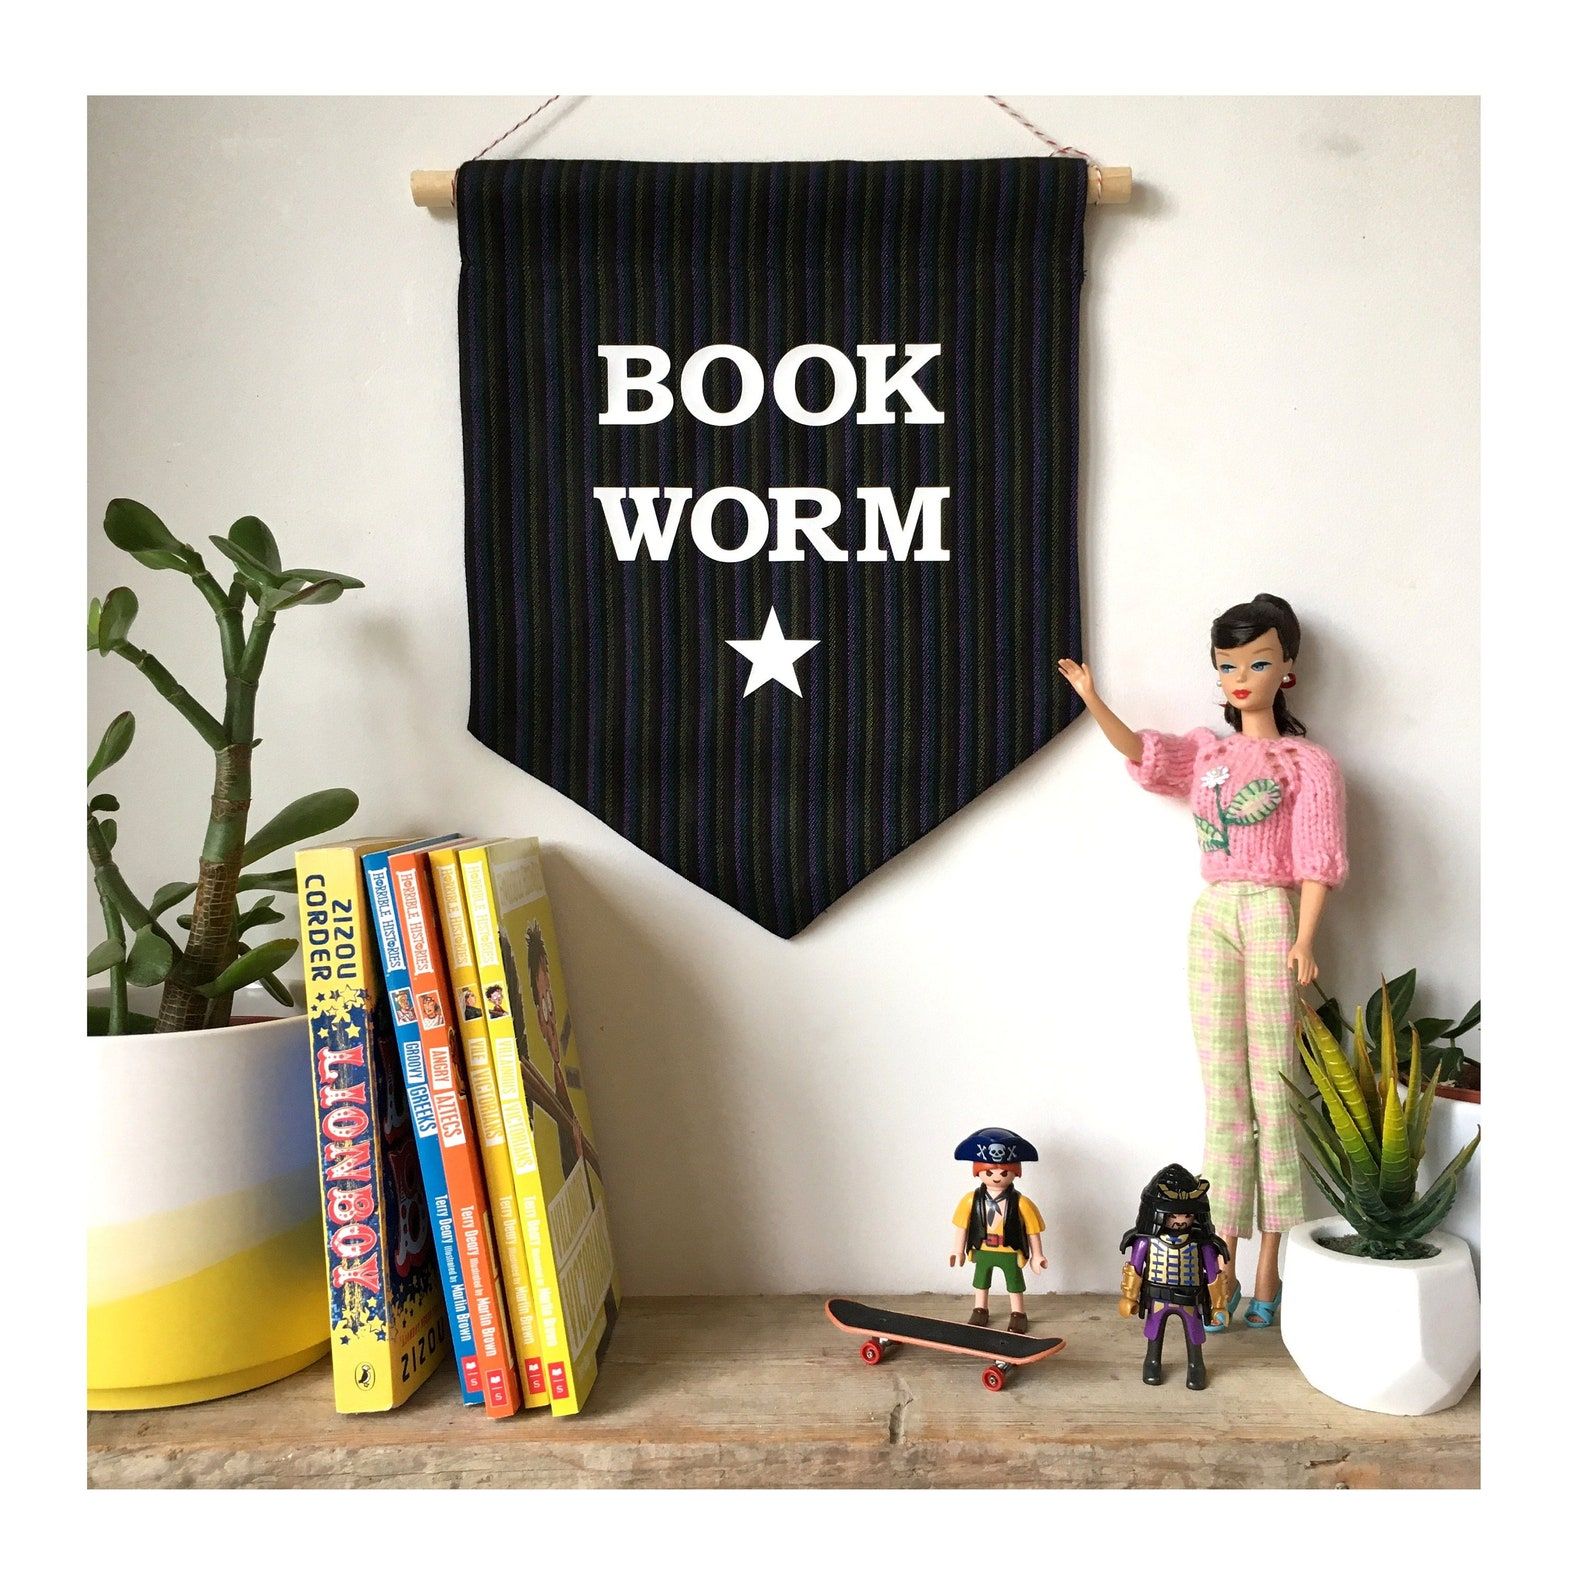 Black banner reading "Book worm" in white font with a white star. It is hanging above a bookshelf with books, plants, and children's toys. 